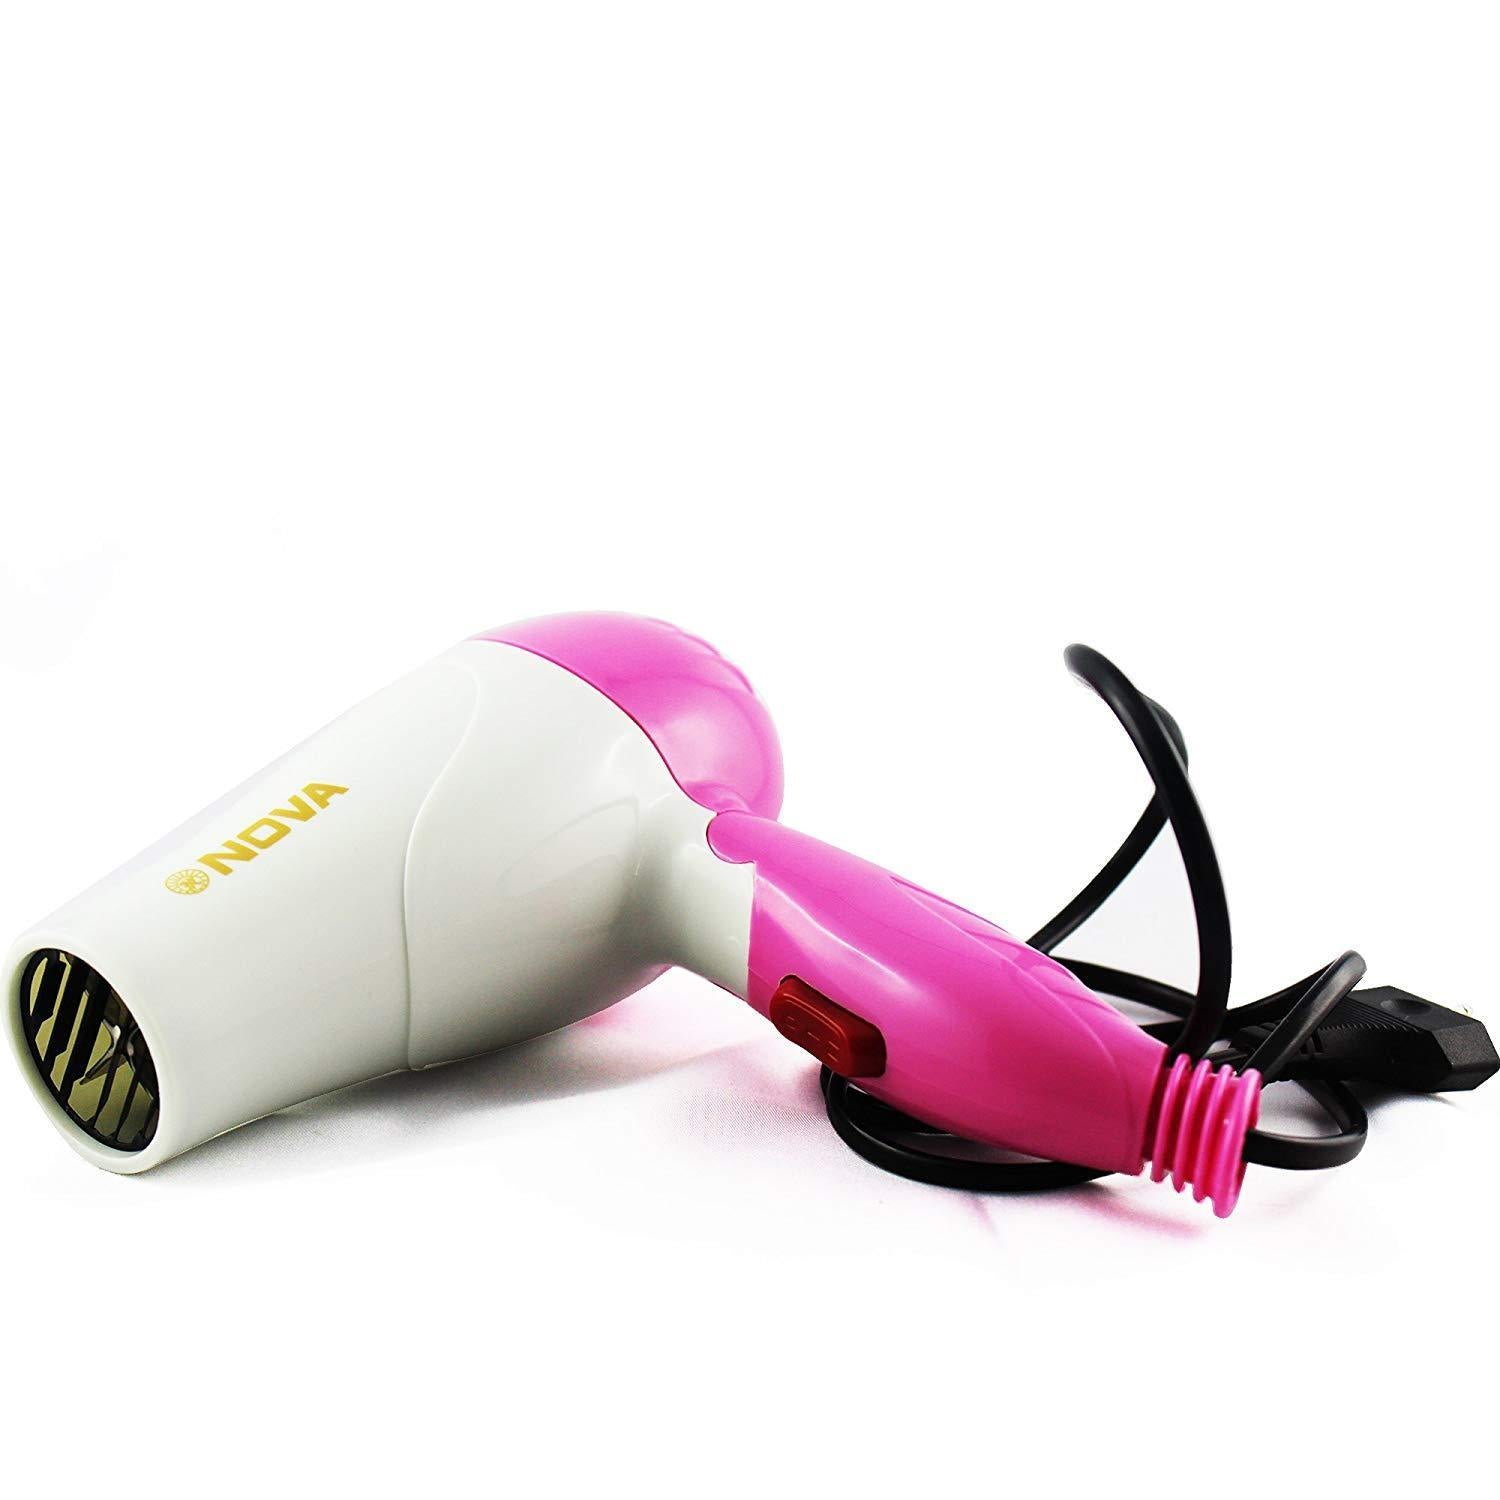 Folding Hair Dryer Hair with 2 speed control - CDesk Dropship